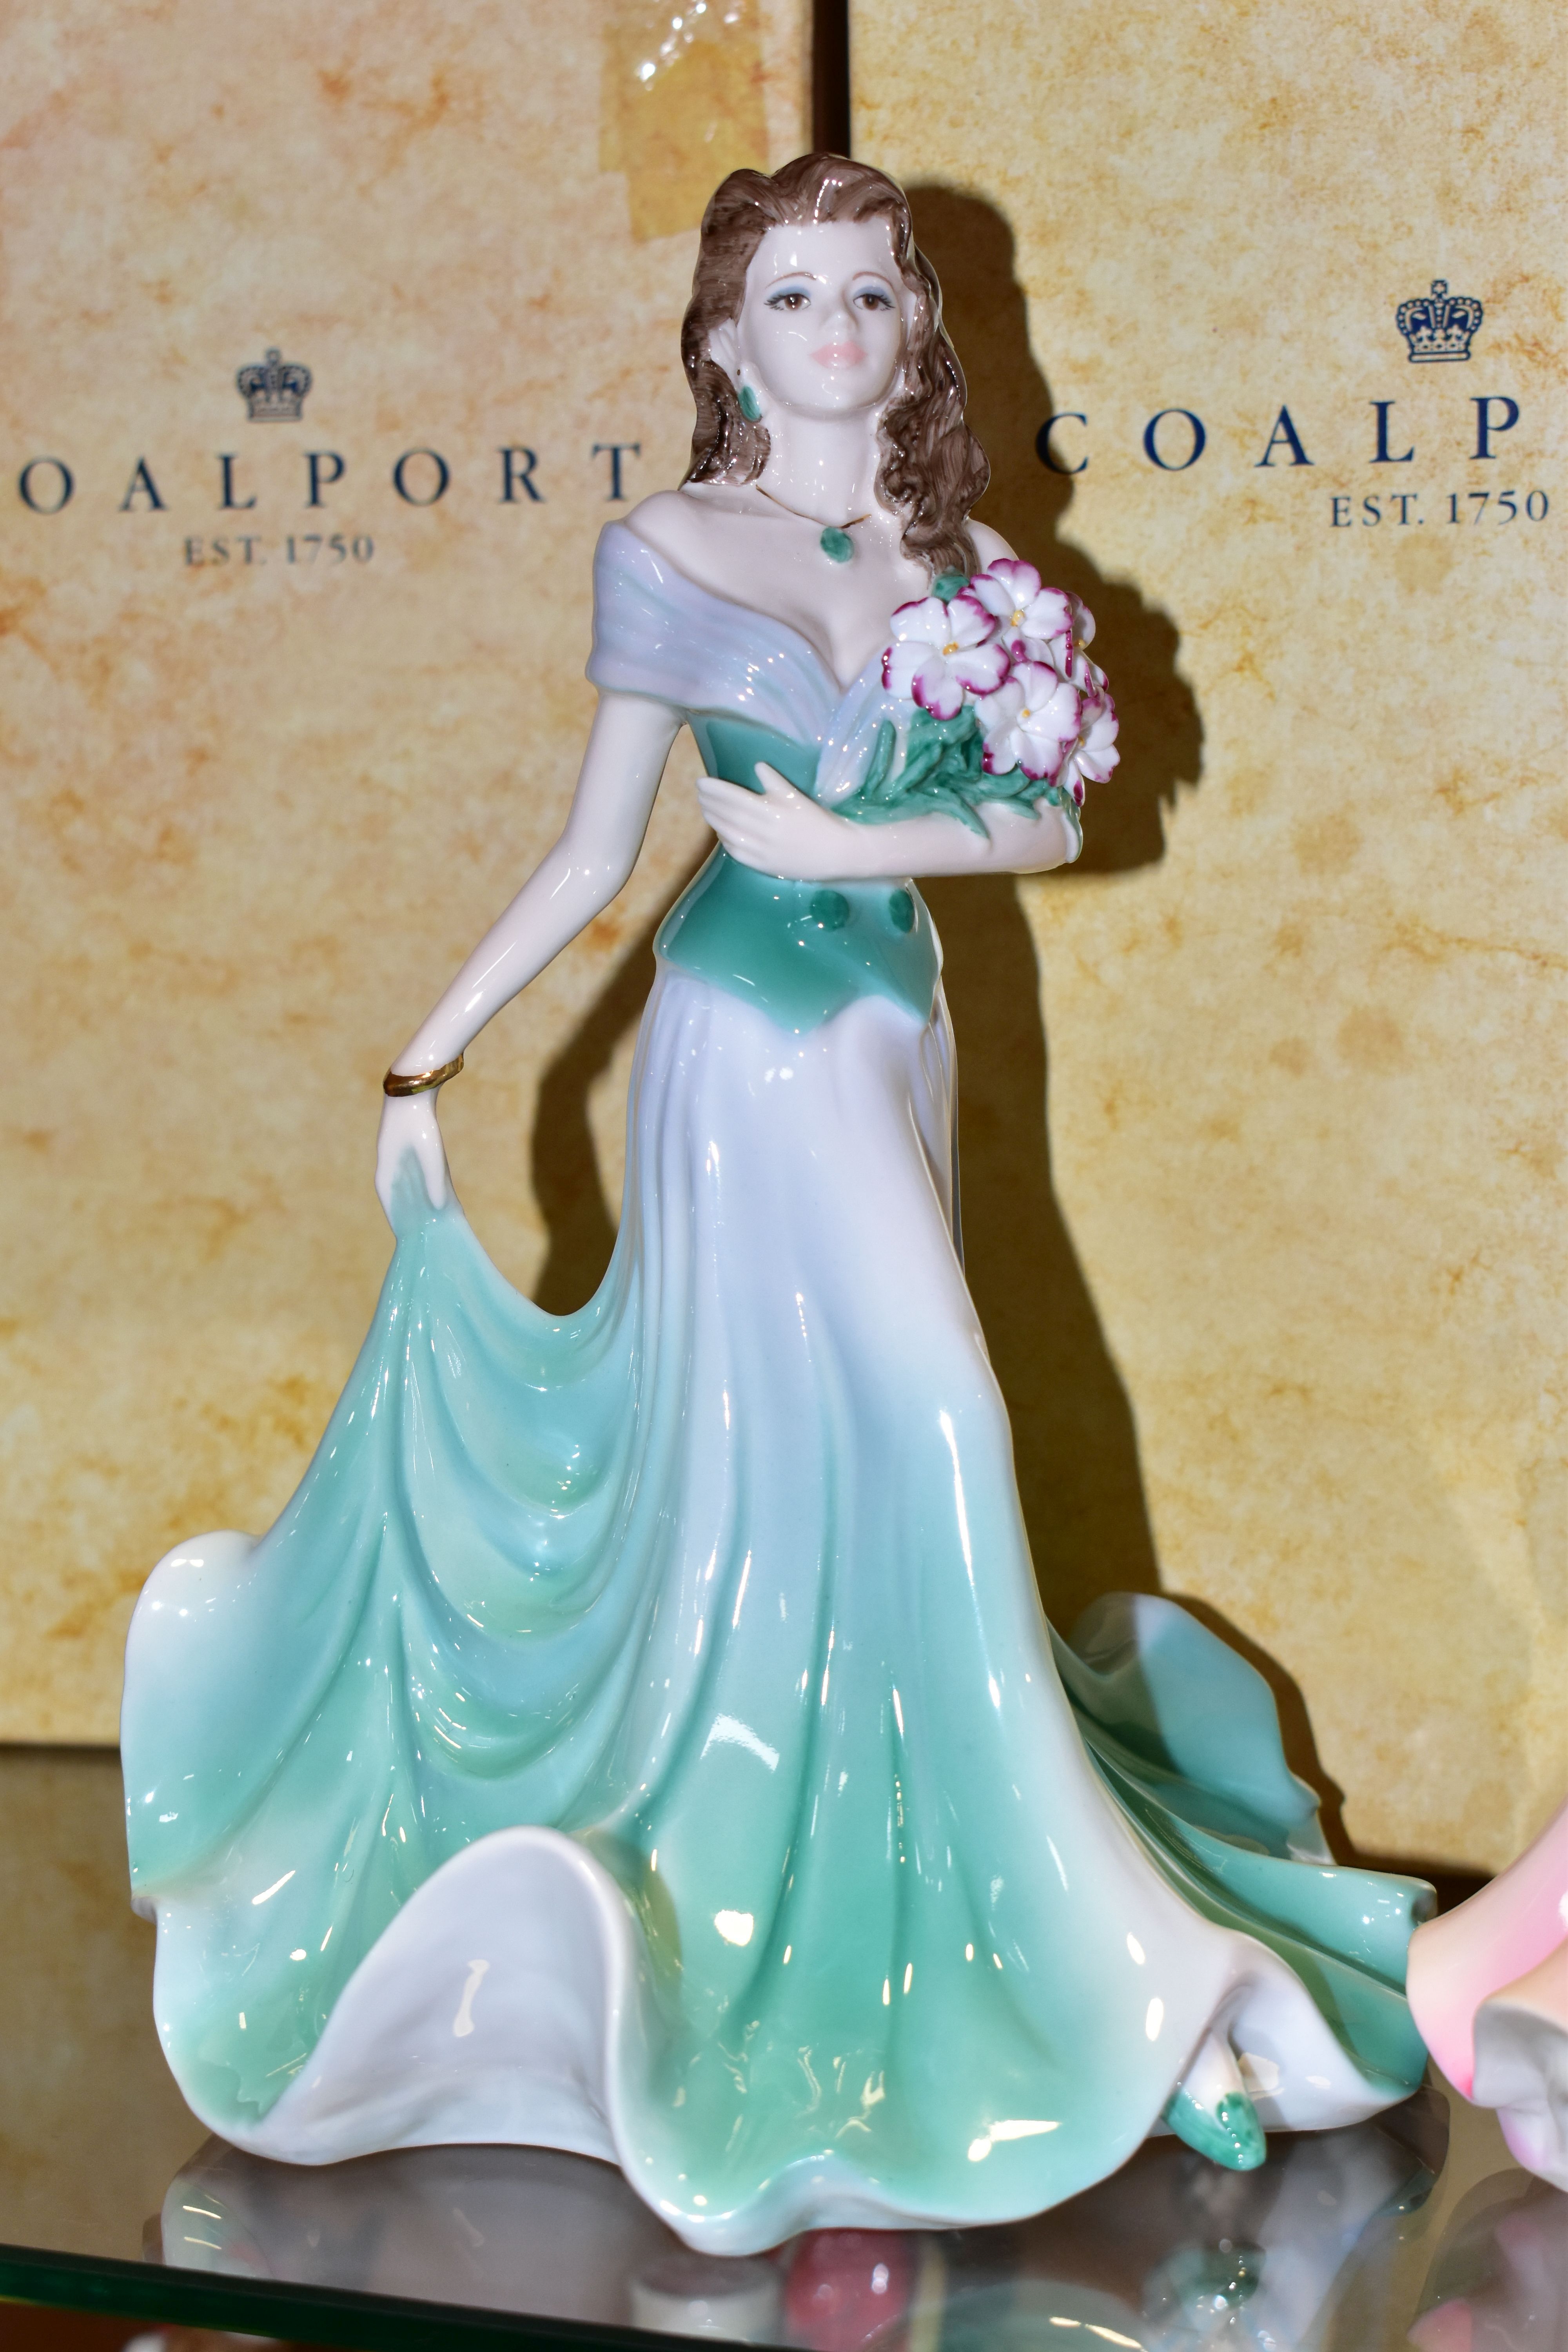 FOUR BOXED COALPORT LADIES OF FASHION FIGURINES, comprising Welsh Ladies of Fashion Nia, a limited - Image 6 of 6